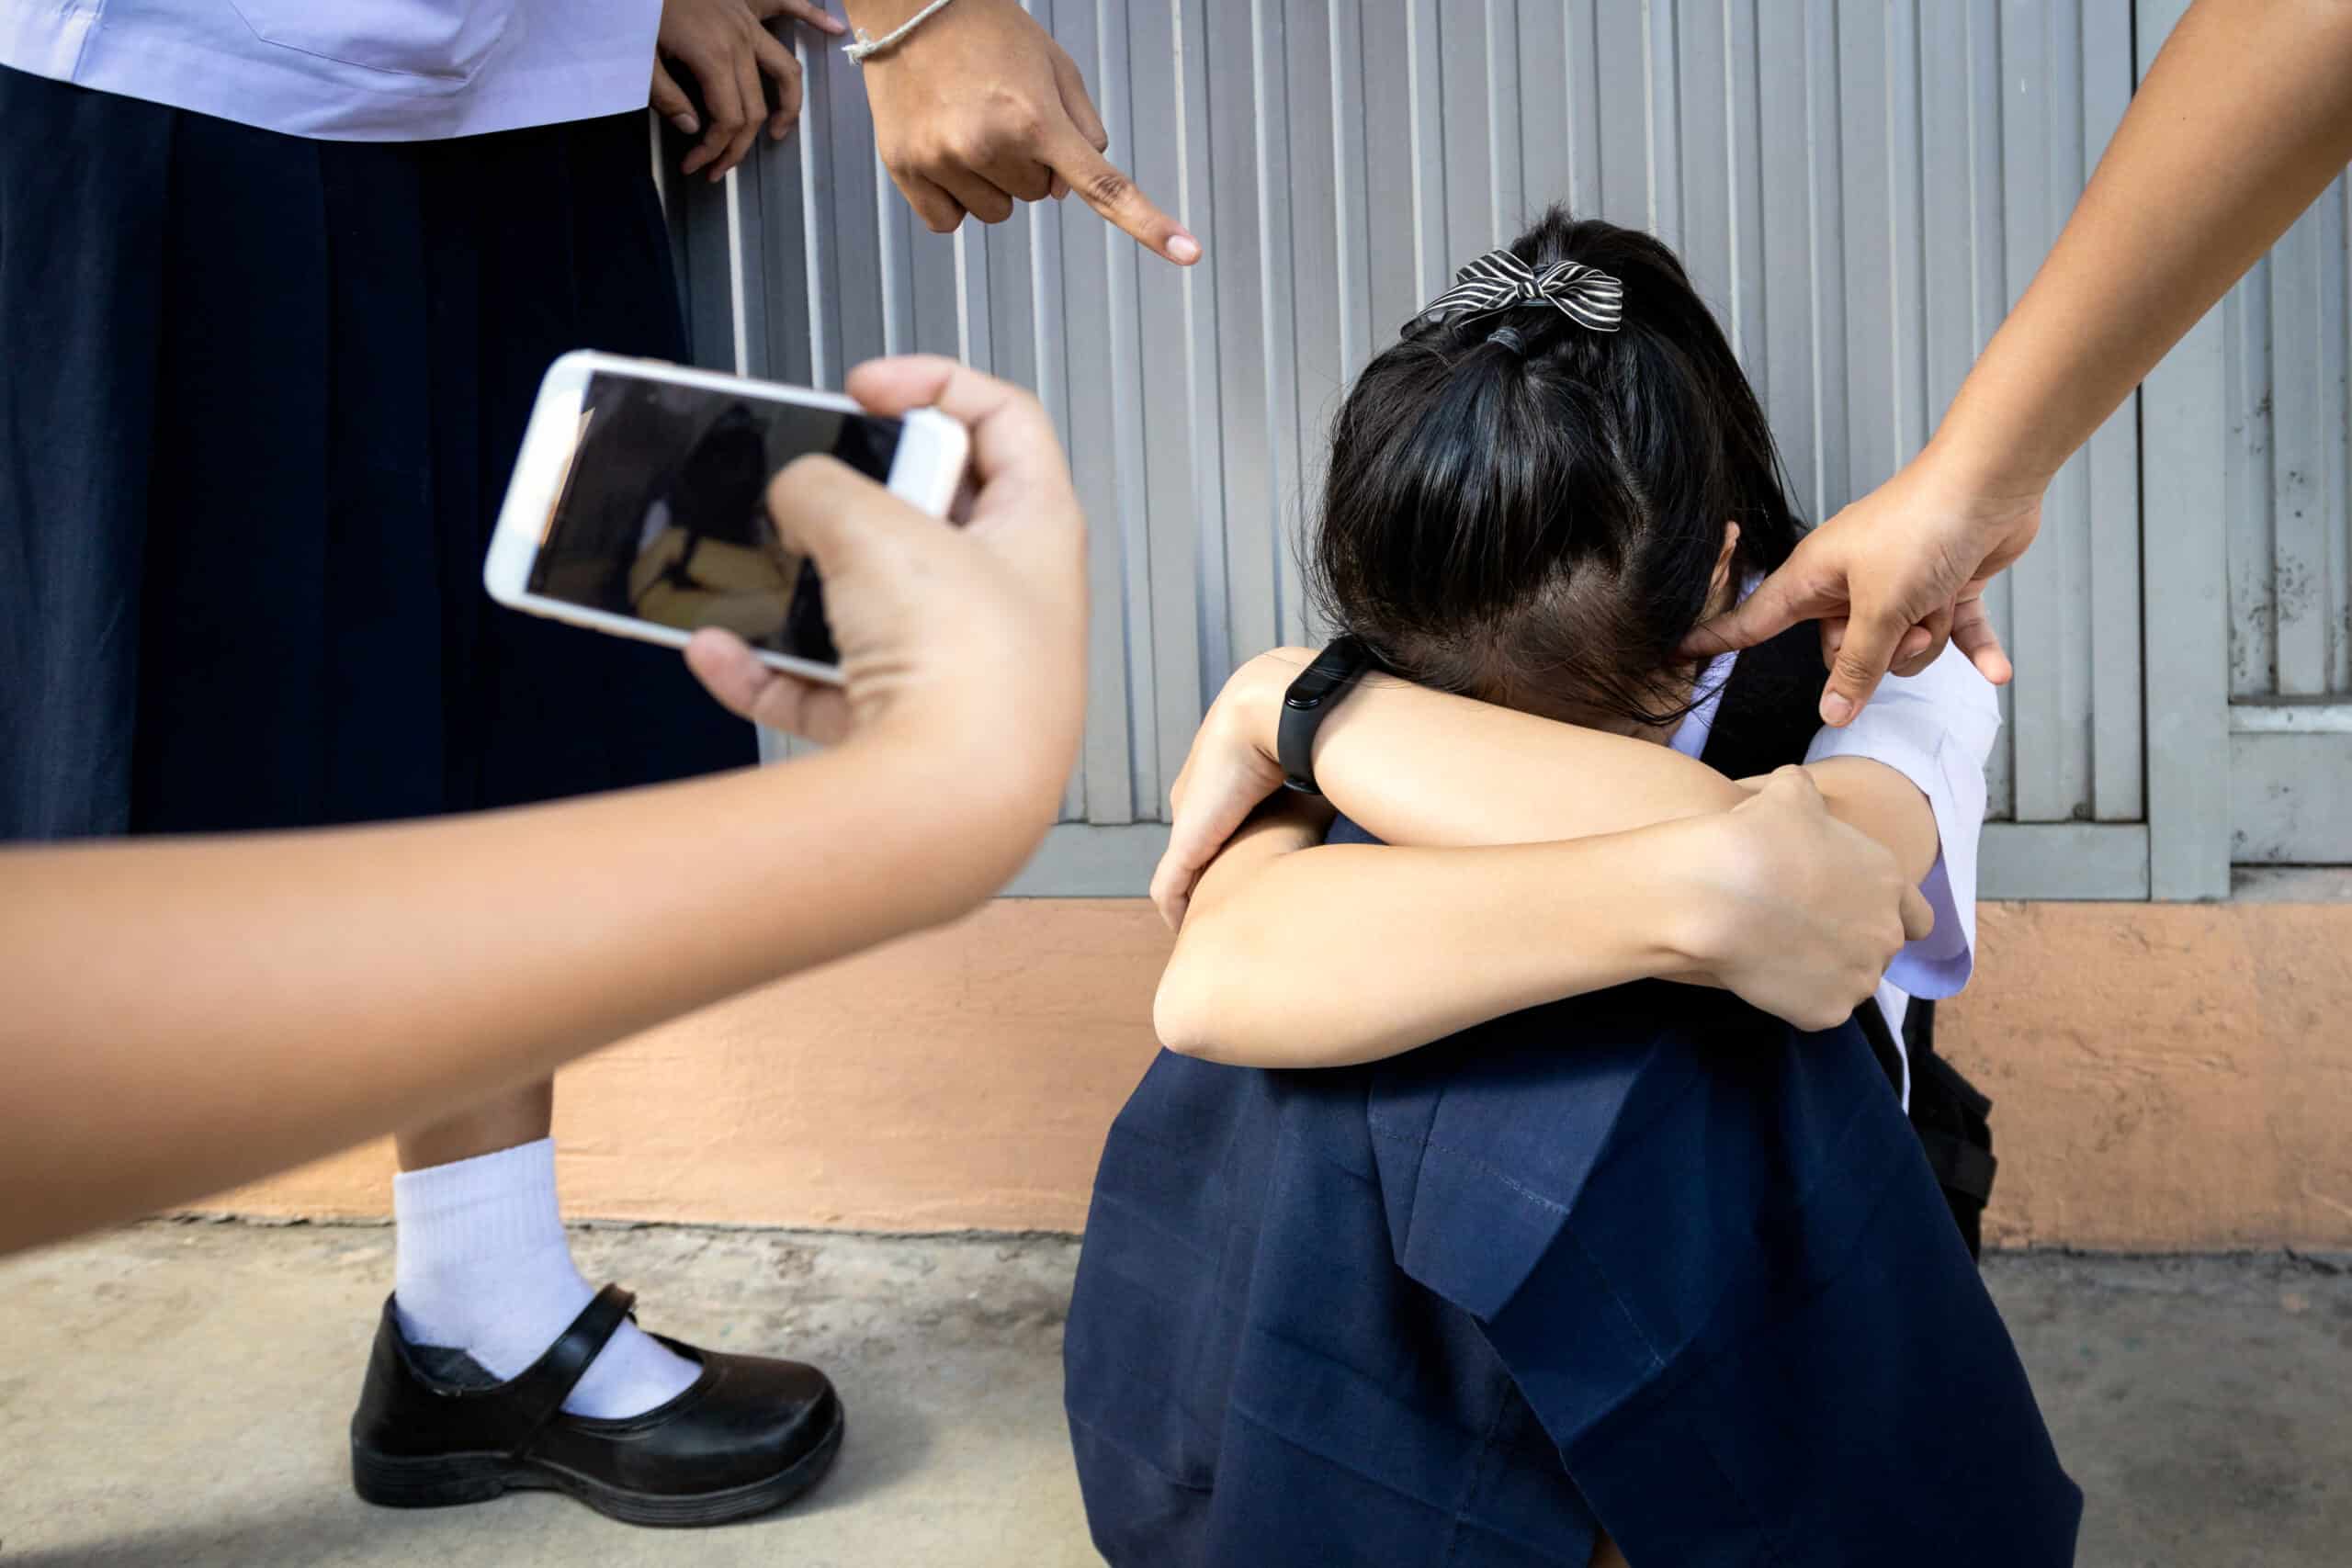 A Way to Empower Students to Cope with Bullying blog article by Dr Michael E. Bernard